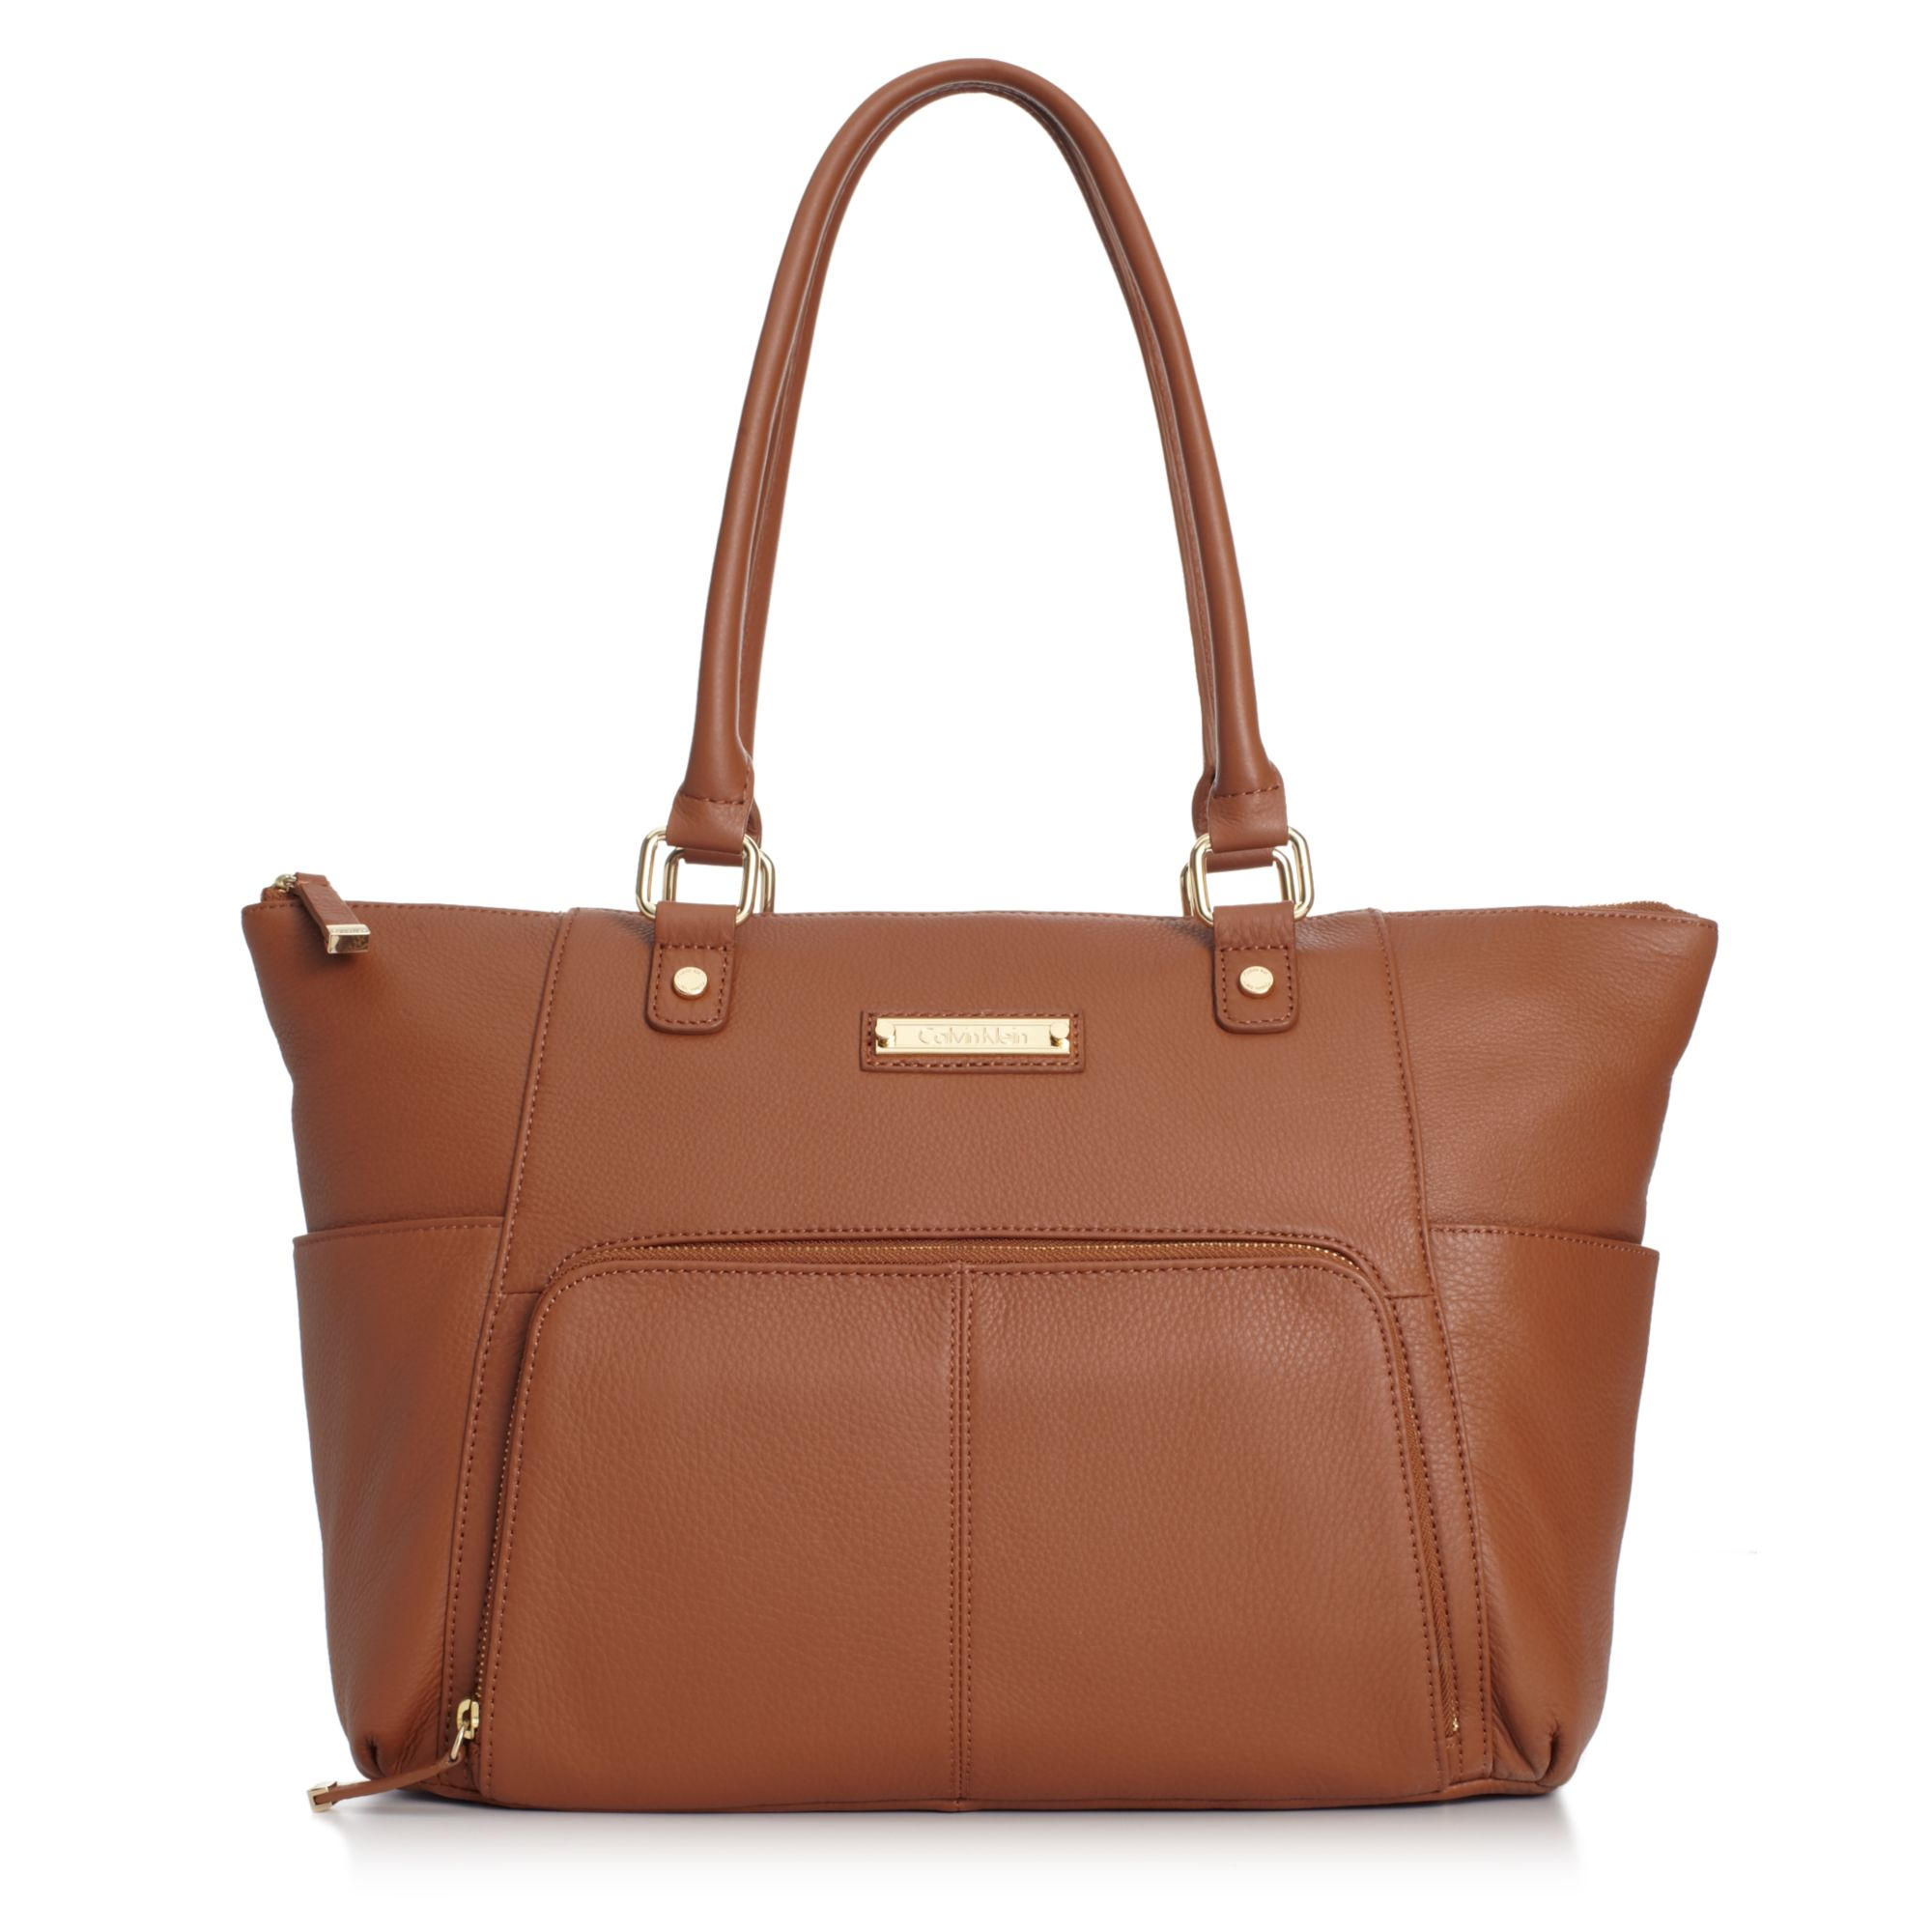 Calvin Klein Key Item Leather Tote in Brown (luggage) | Lyst